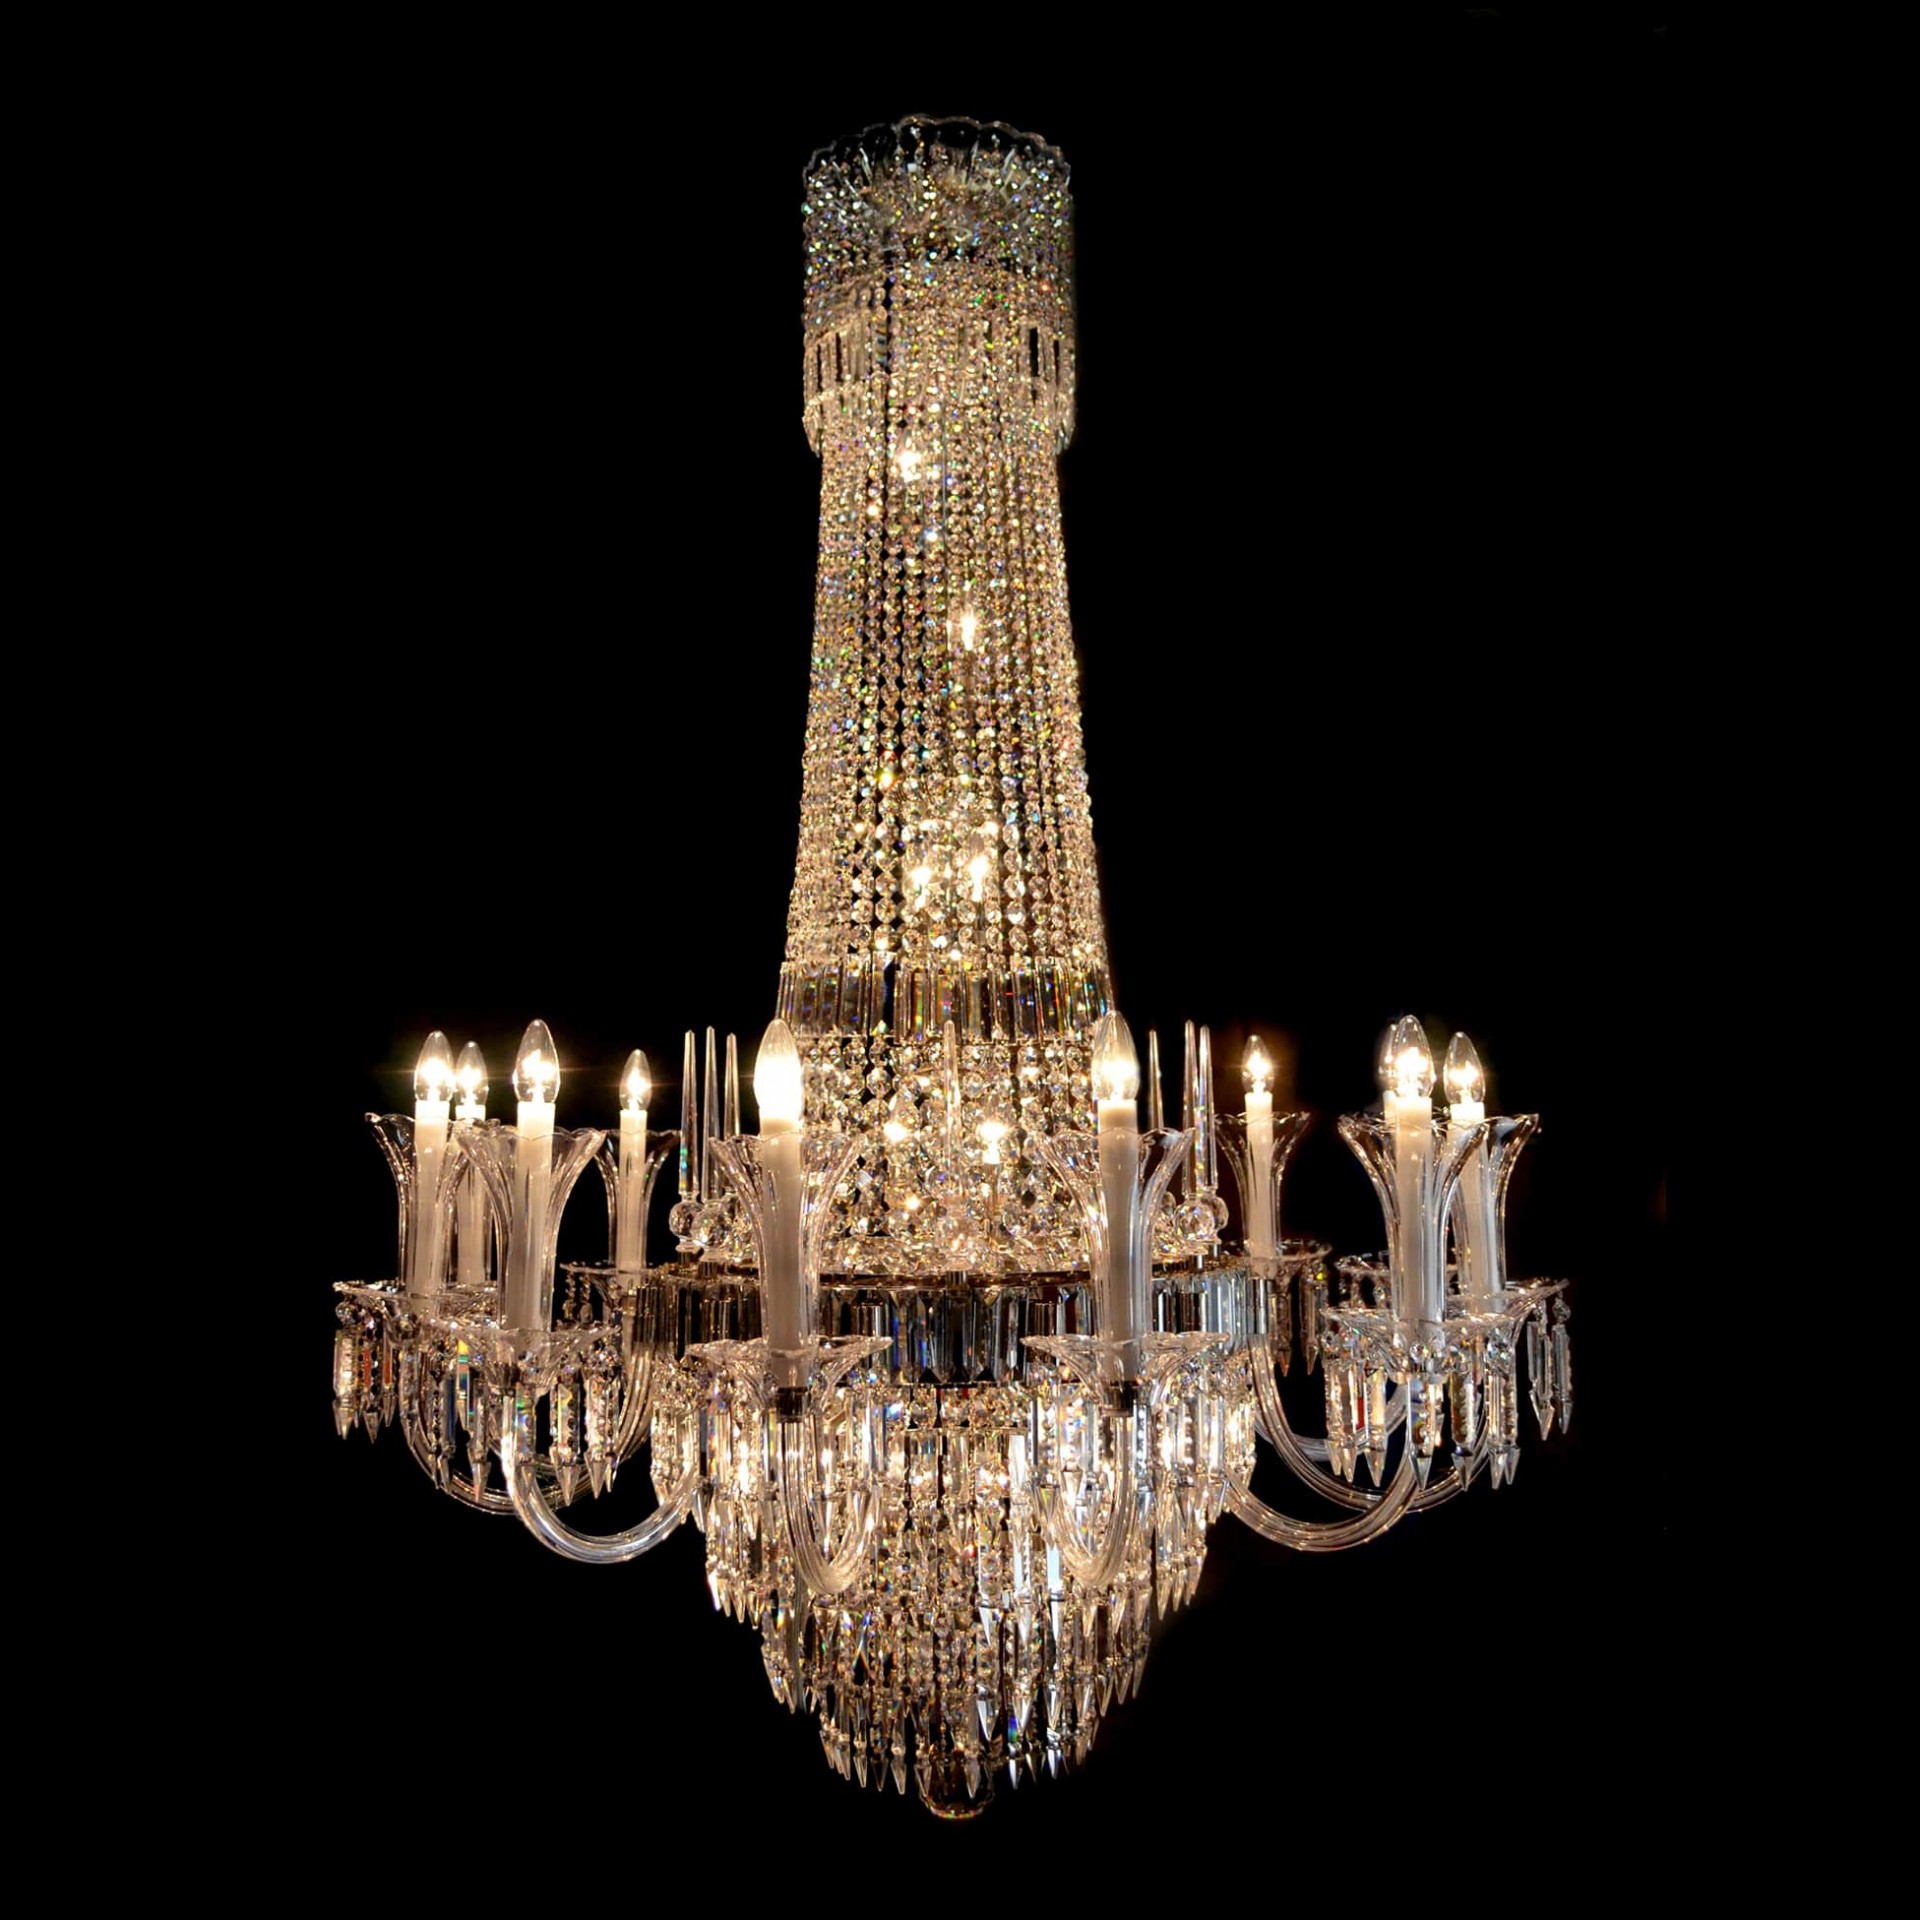 47X60 Inch French Empire Chandelier K9 Crystal Chandelier for Foyer